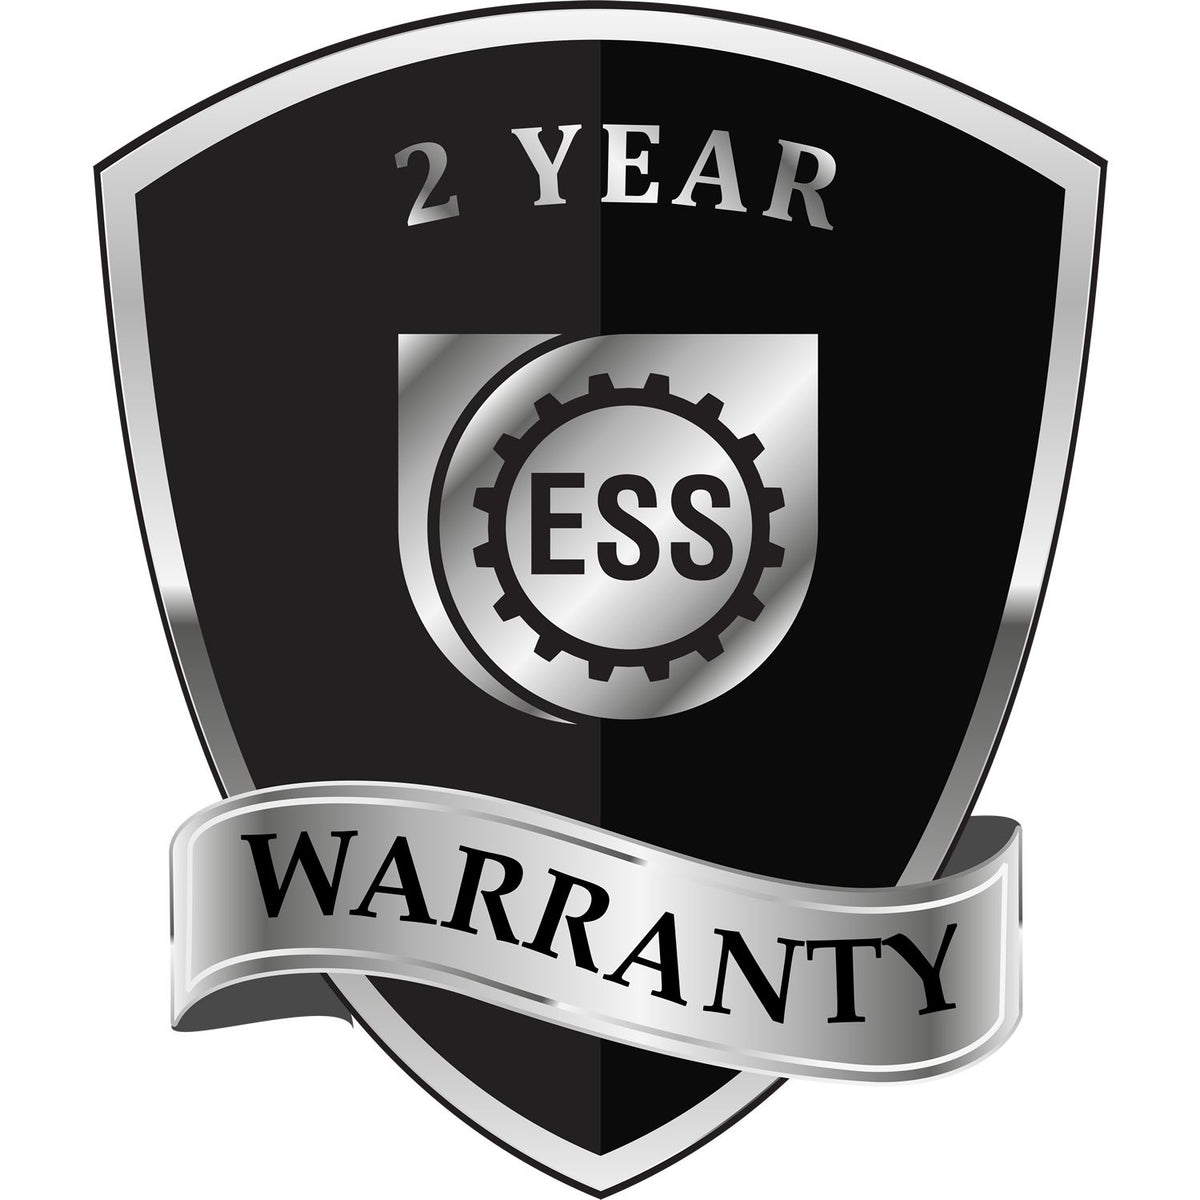 A black and silver badge or emblem showing warranty information for the New Hampshire Geologist Desk Seal